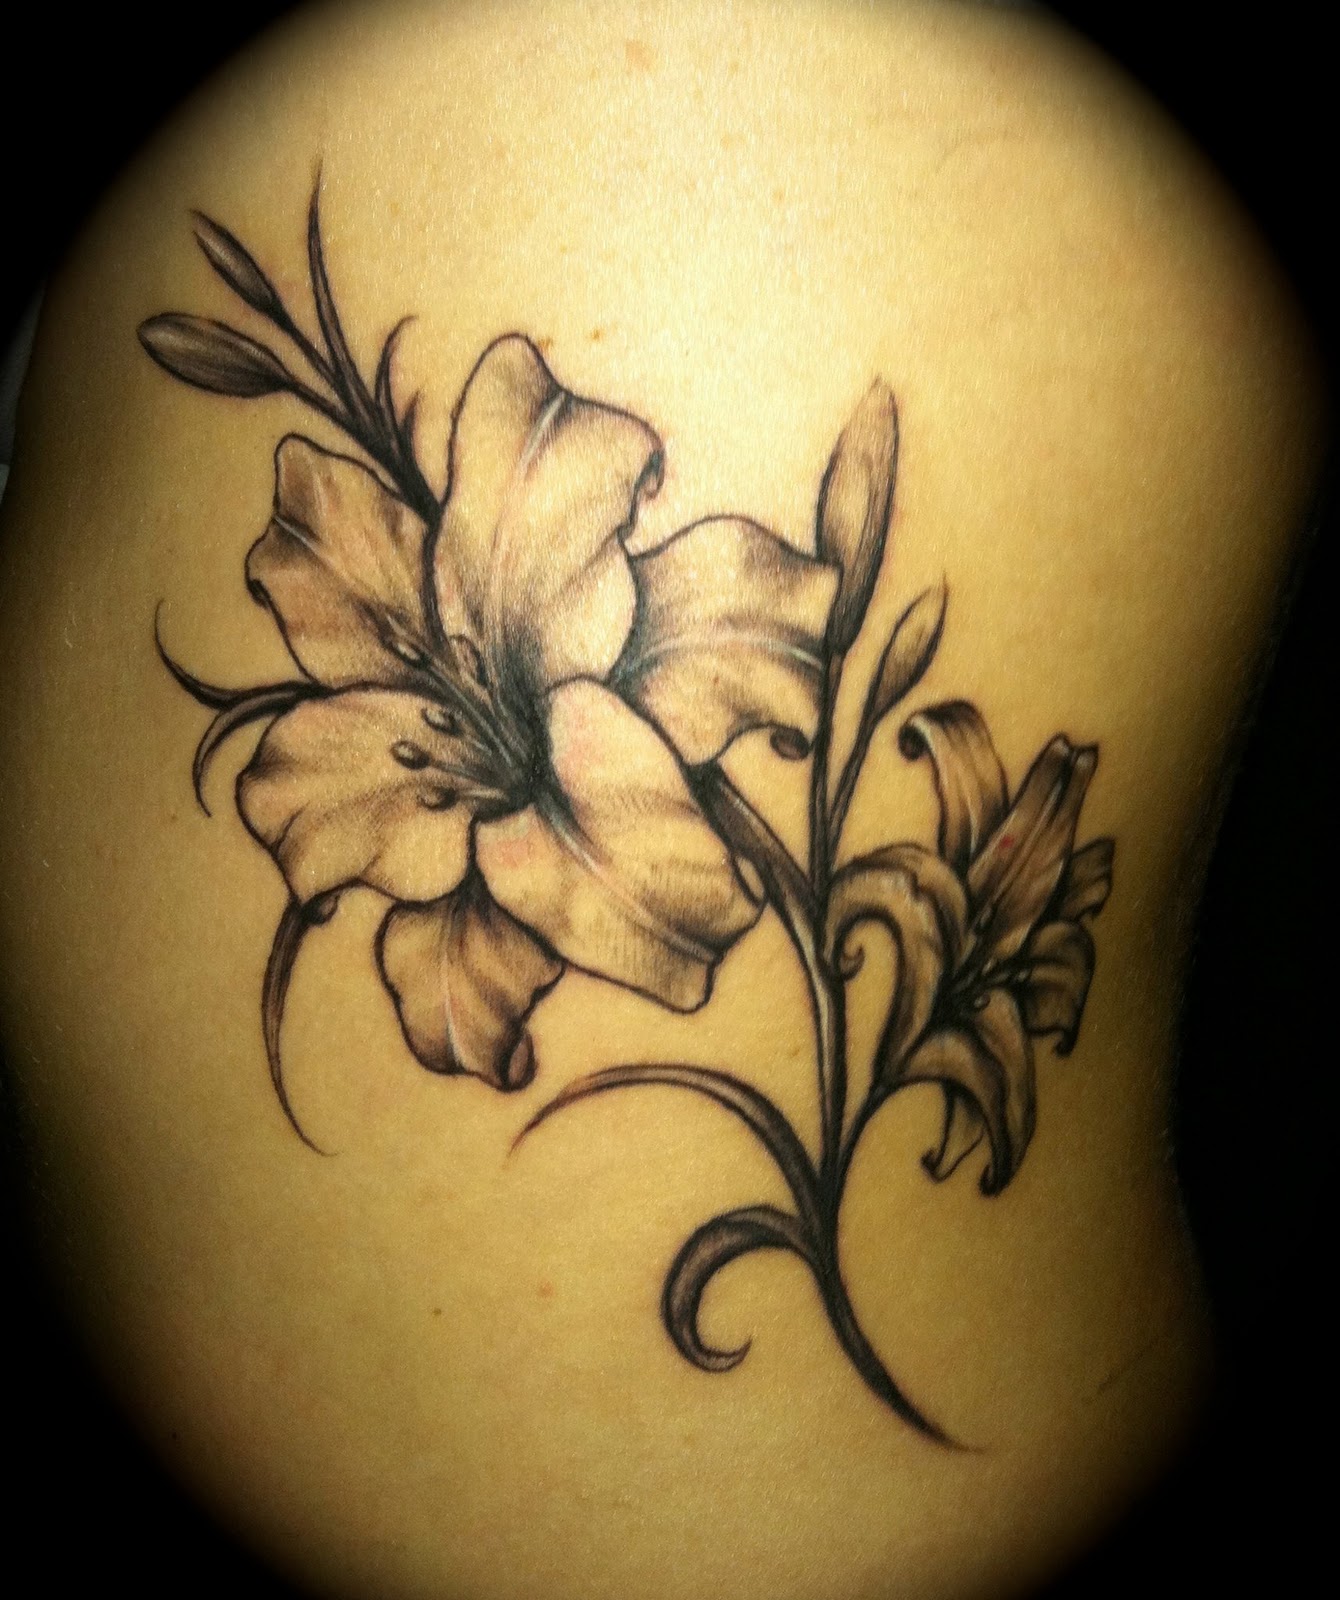 Flower Tattoos, Designs And Ideas : Page 9